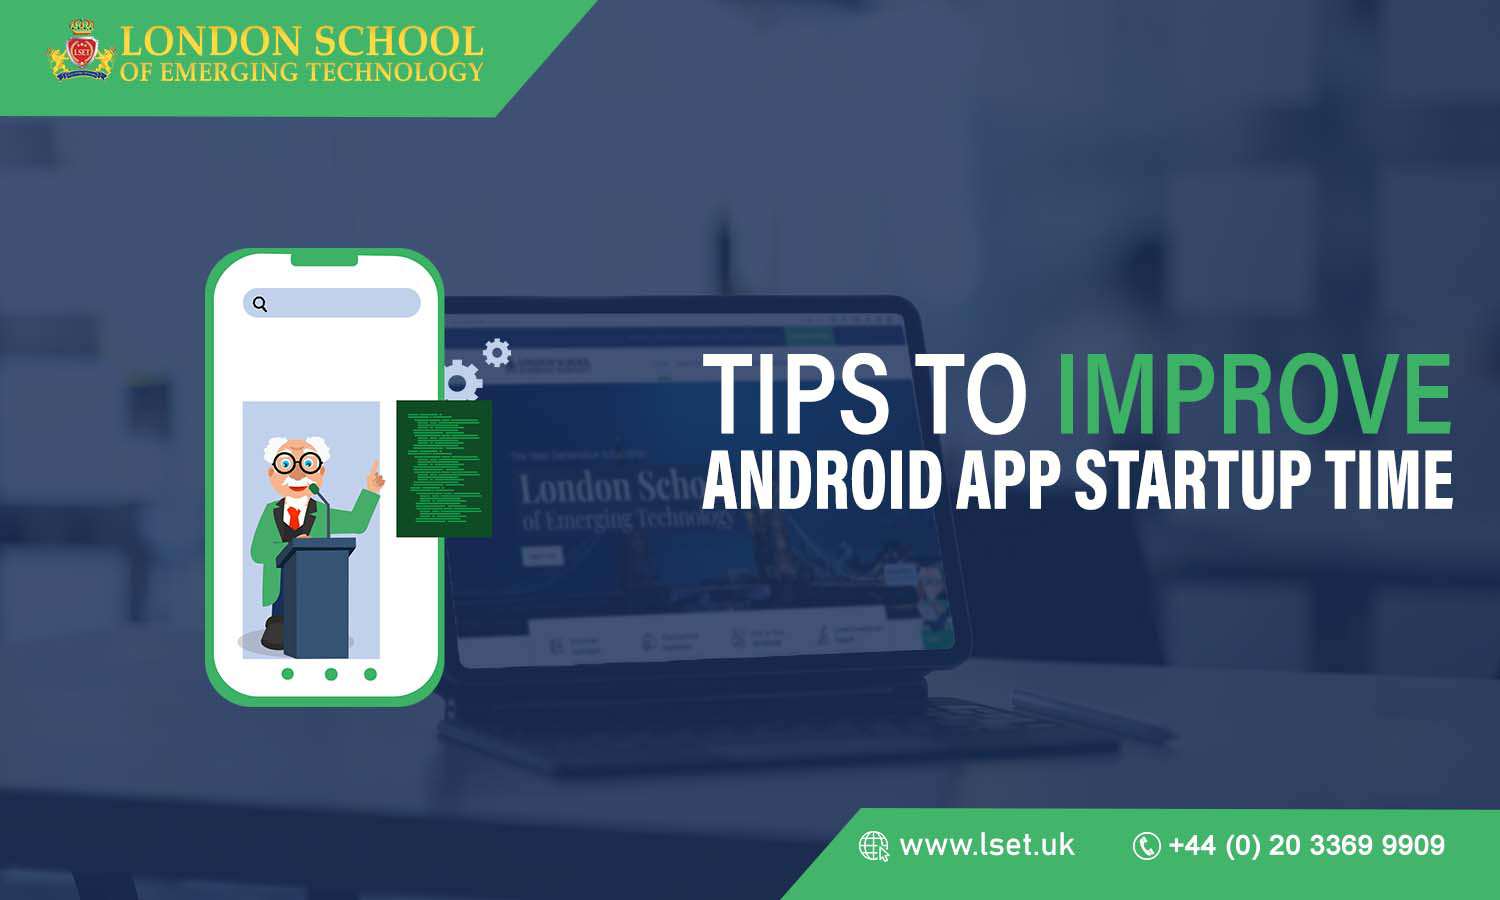 Tips to Improve Android App Startup Time